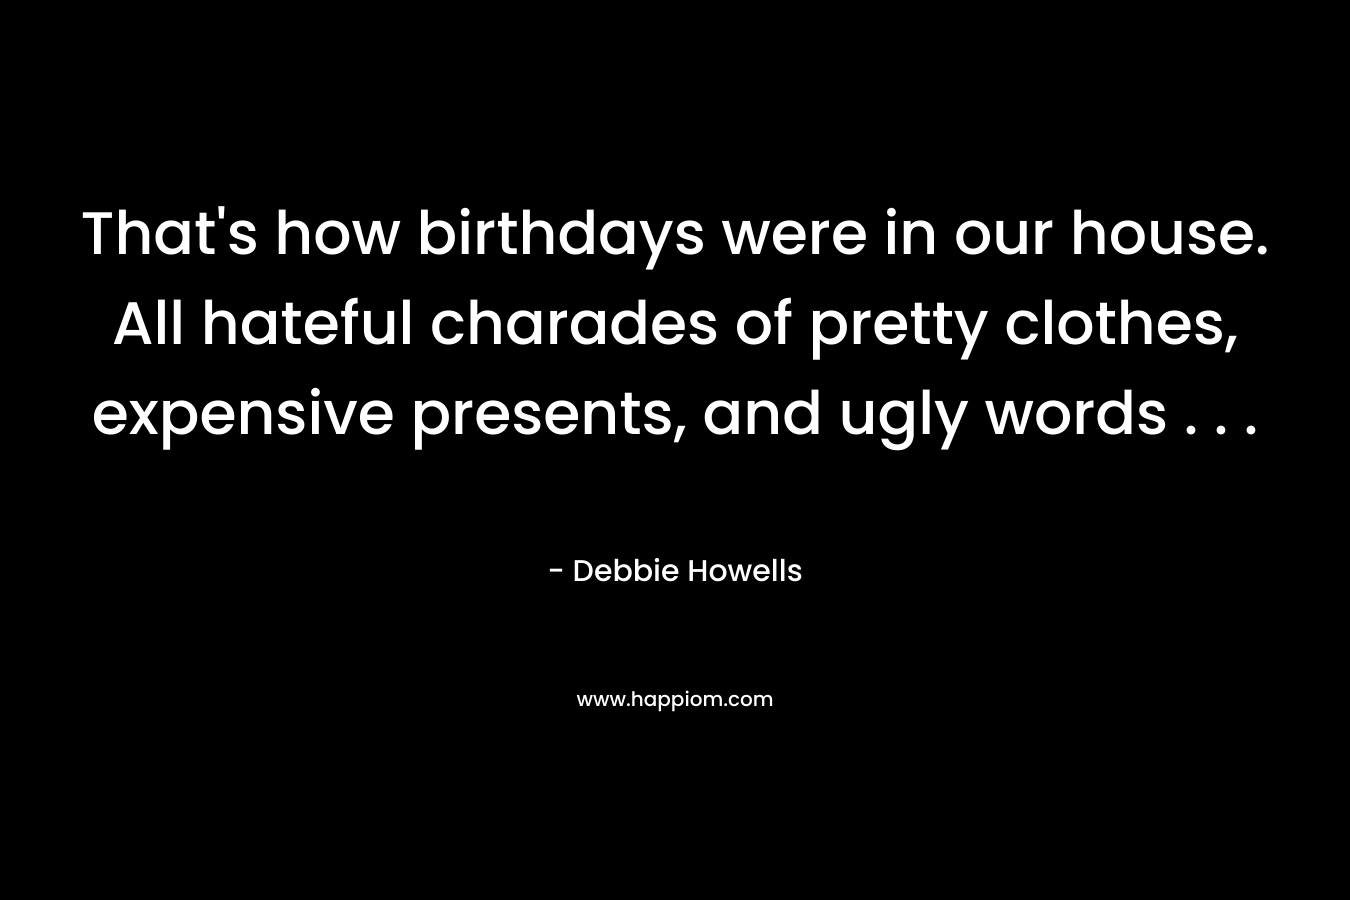 That's how birthdays were in our house. All hateful charades of pretty clothes, expensive presents, and ugly words . . .